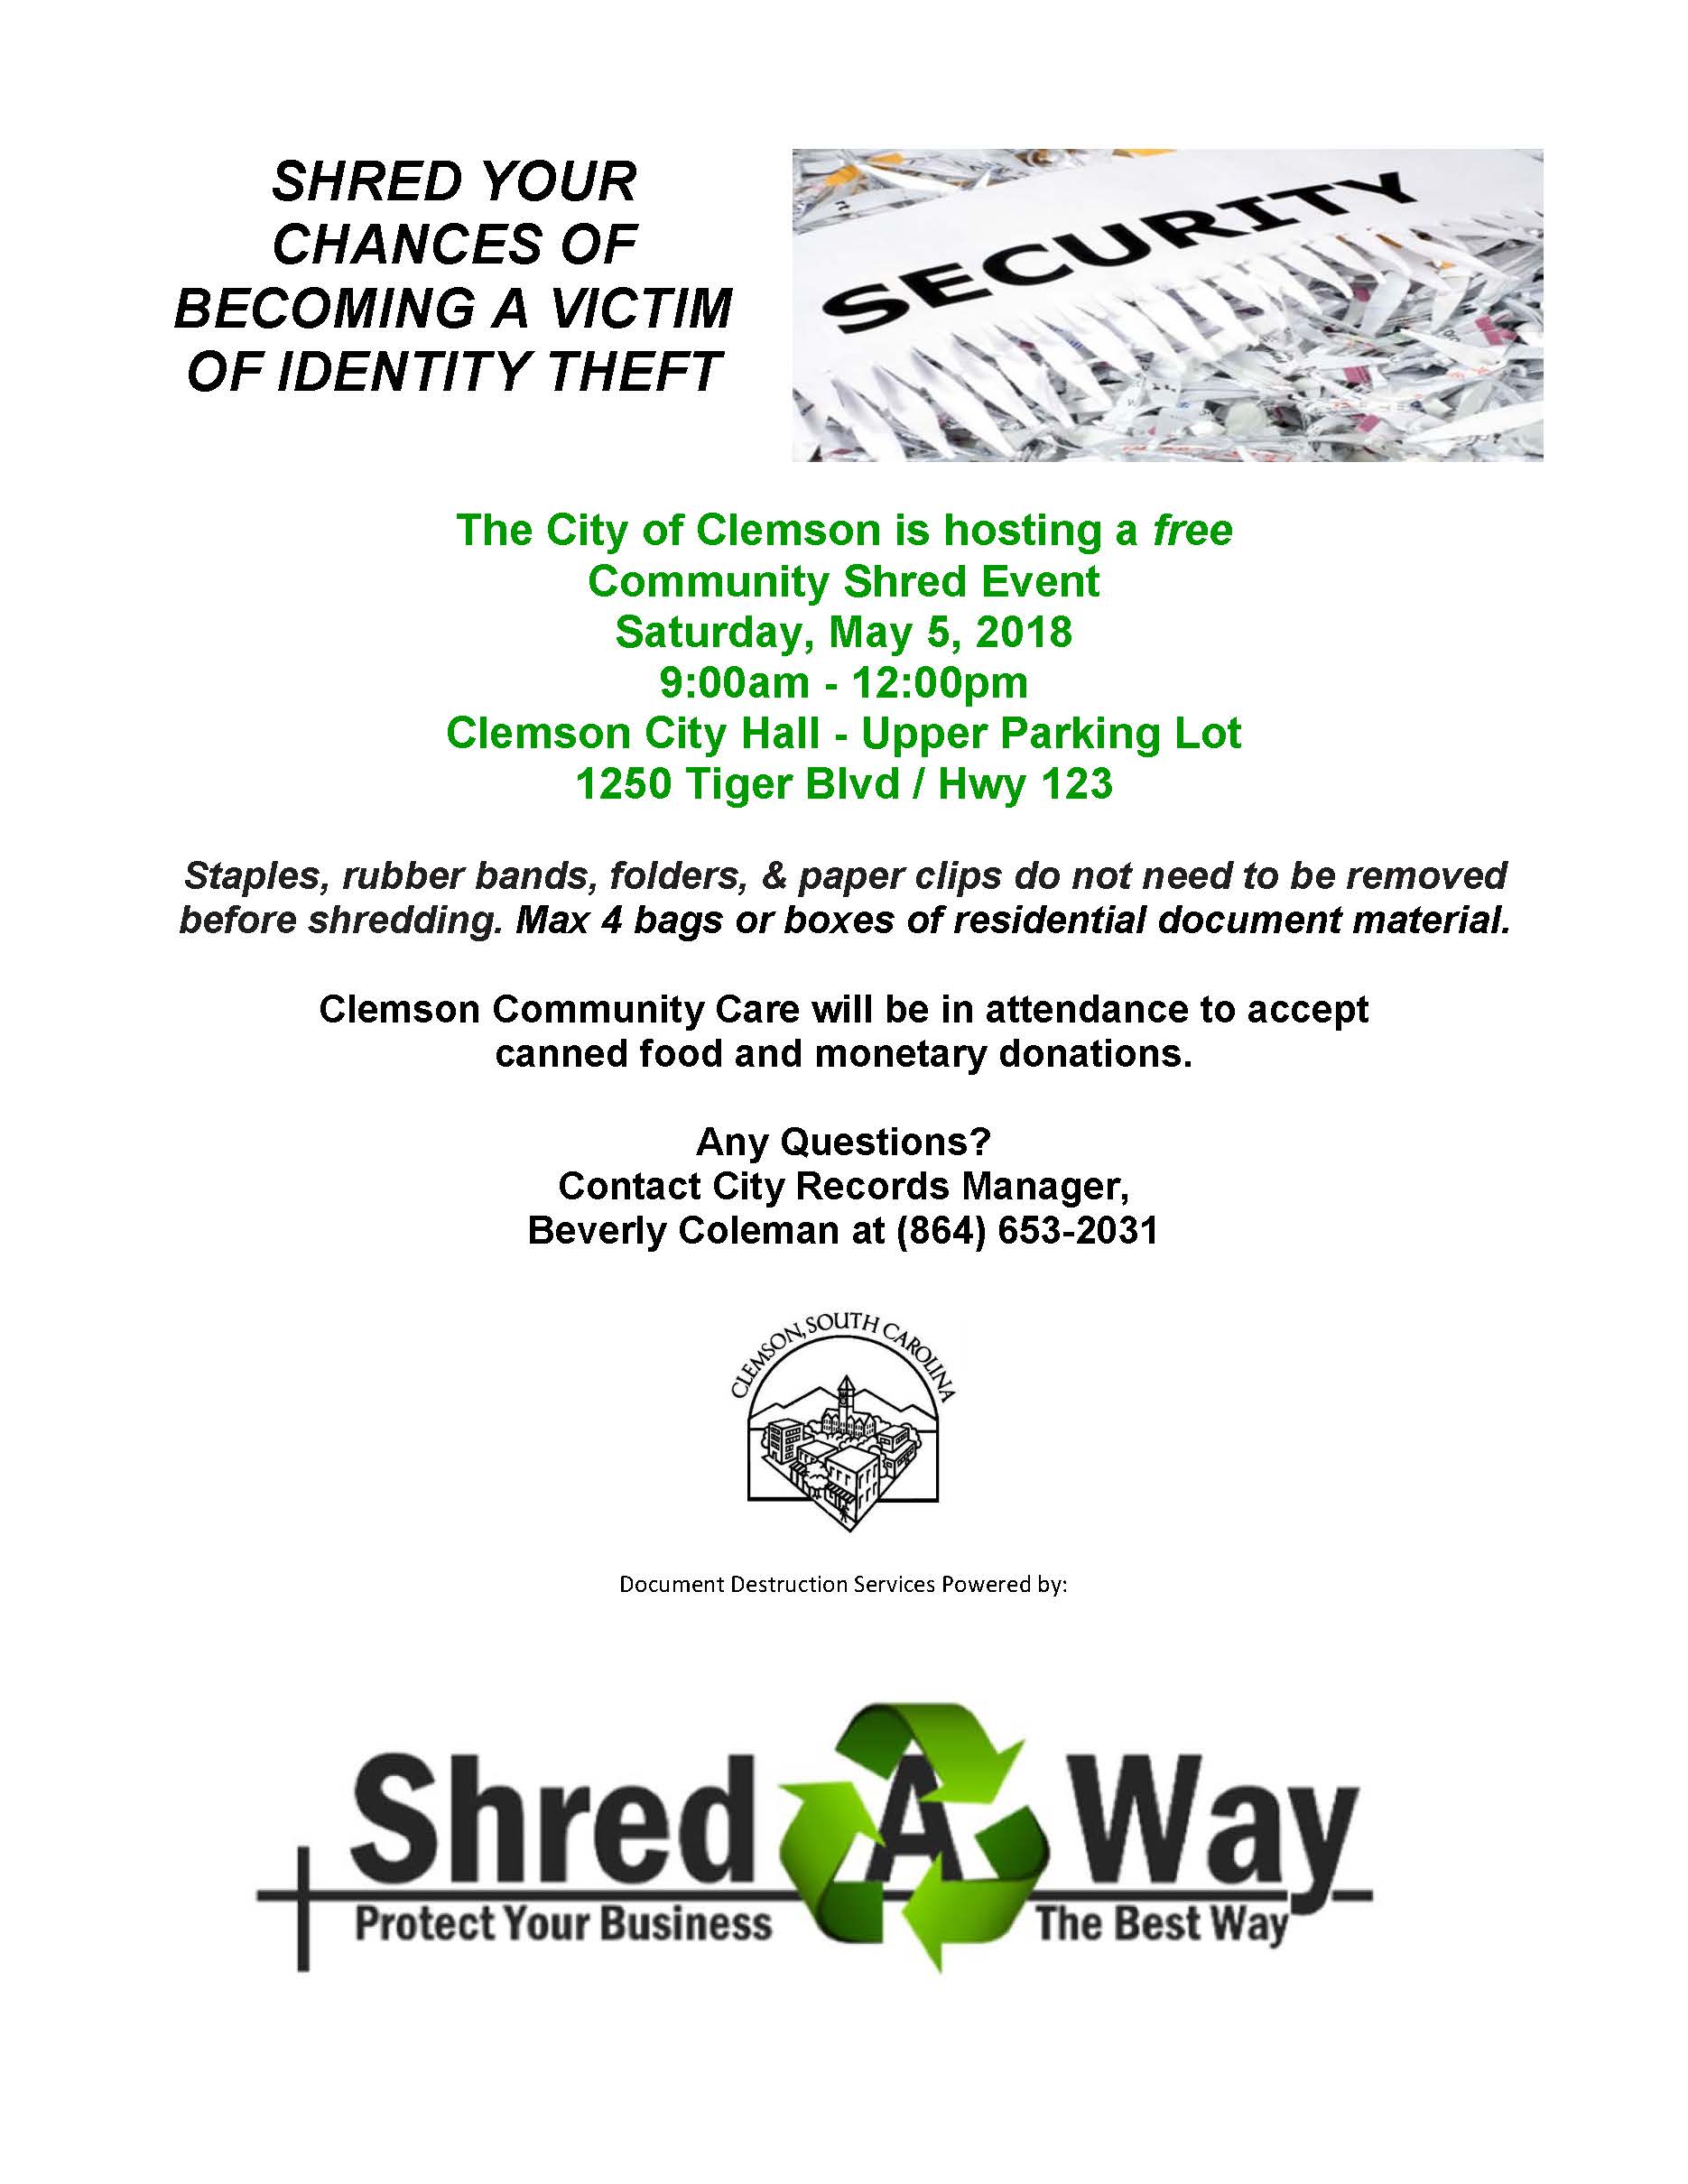 Community Shred Day May 5th, 2018 at City Hall Upper Parking Lot